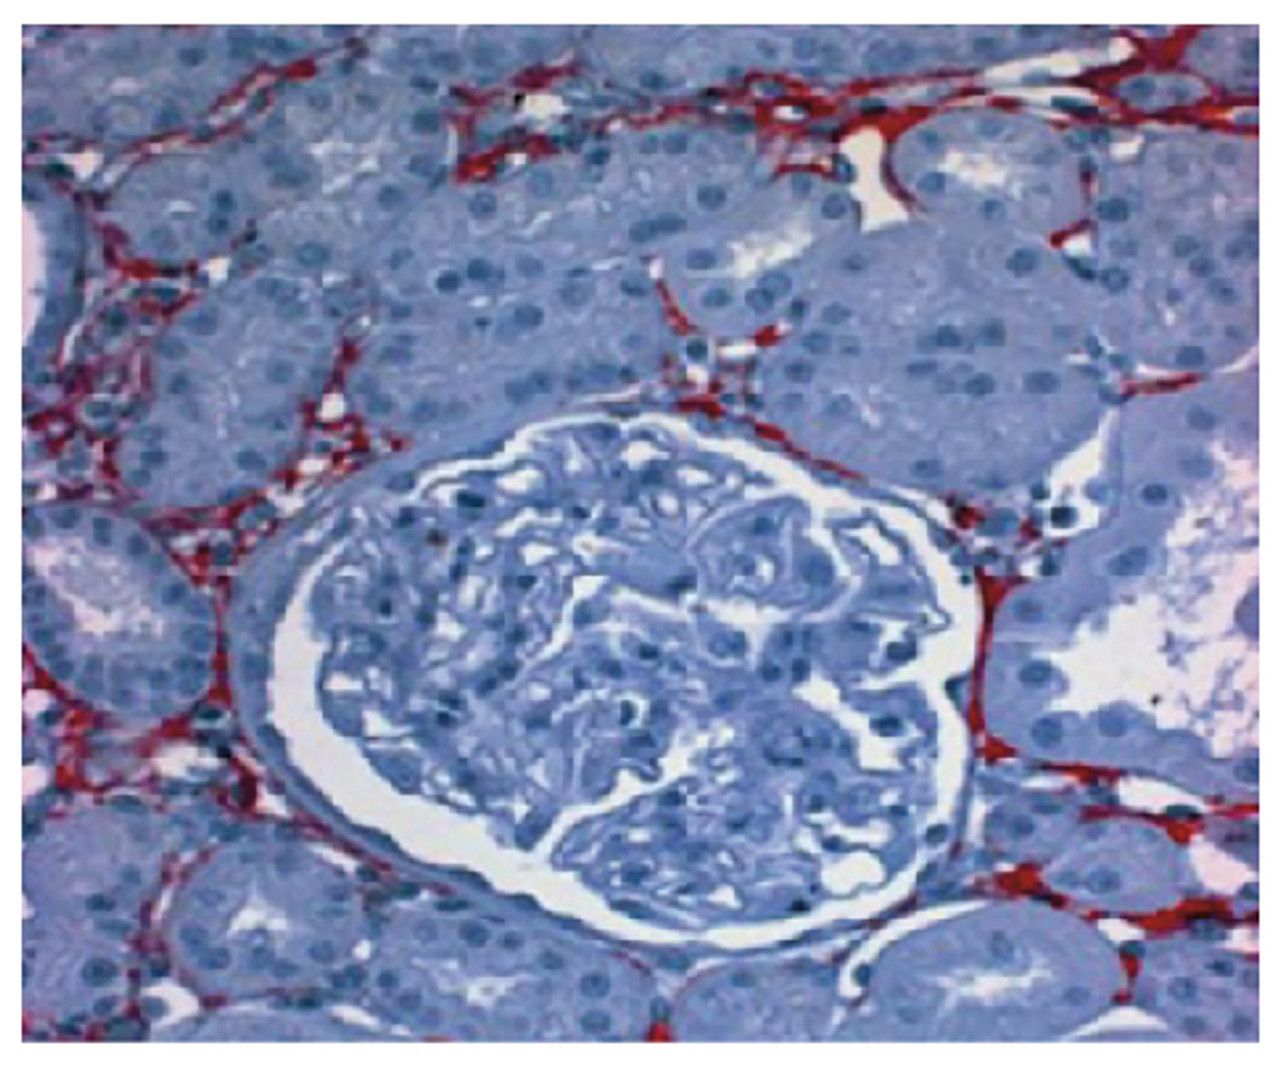 Paraffin embedded rat kidney section post uninephrectomy was stained with Goat Anti-Type I Collagen-UNLB (Cat. No. 98-500) followed by a secondary antibody and AEC.

Image from Wang-Rosenke Y, Khadzhynov D, Loof T, Mika A, Kawachi H, Neumayer H, et al. Tyrosine kinases inhibition by Imatinib slows progression in chronic anti-thy1 glomerulosclerosis of the rat. BMC Nephrol. 2013;14:223. Figure 3 (b)